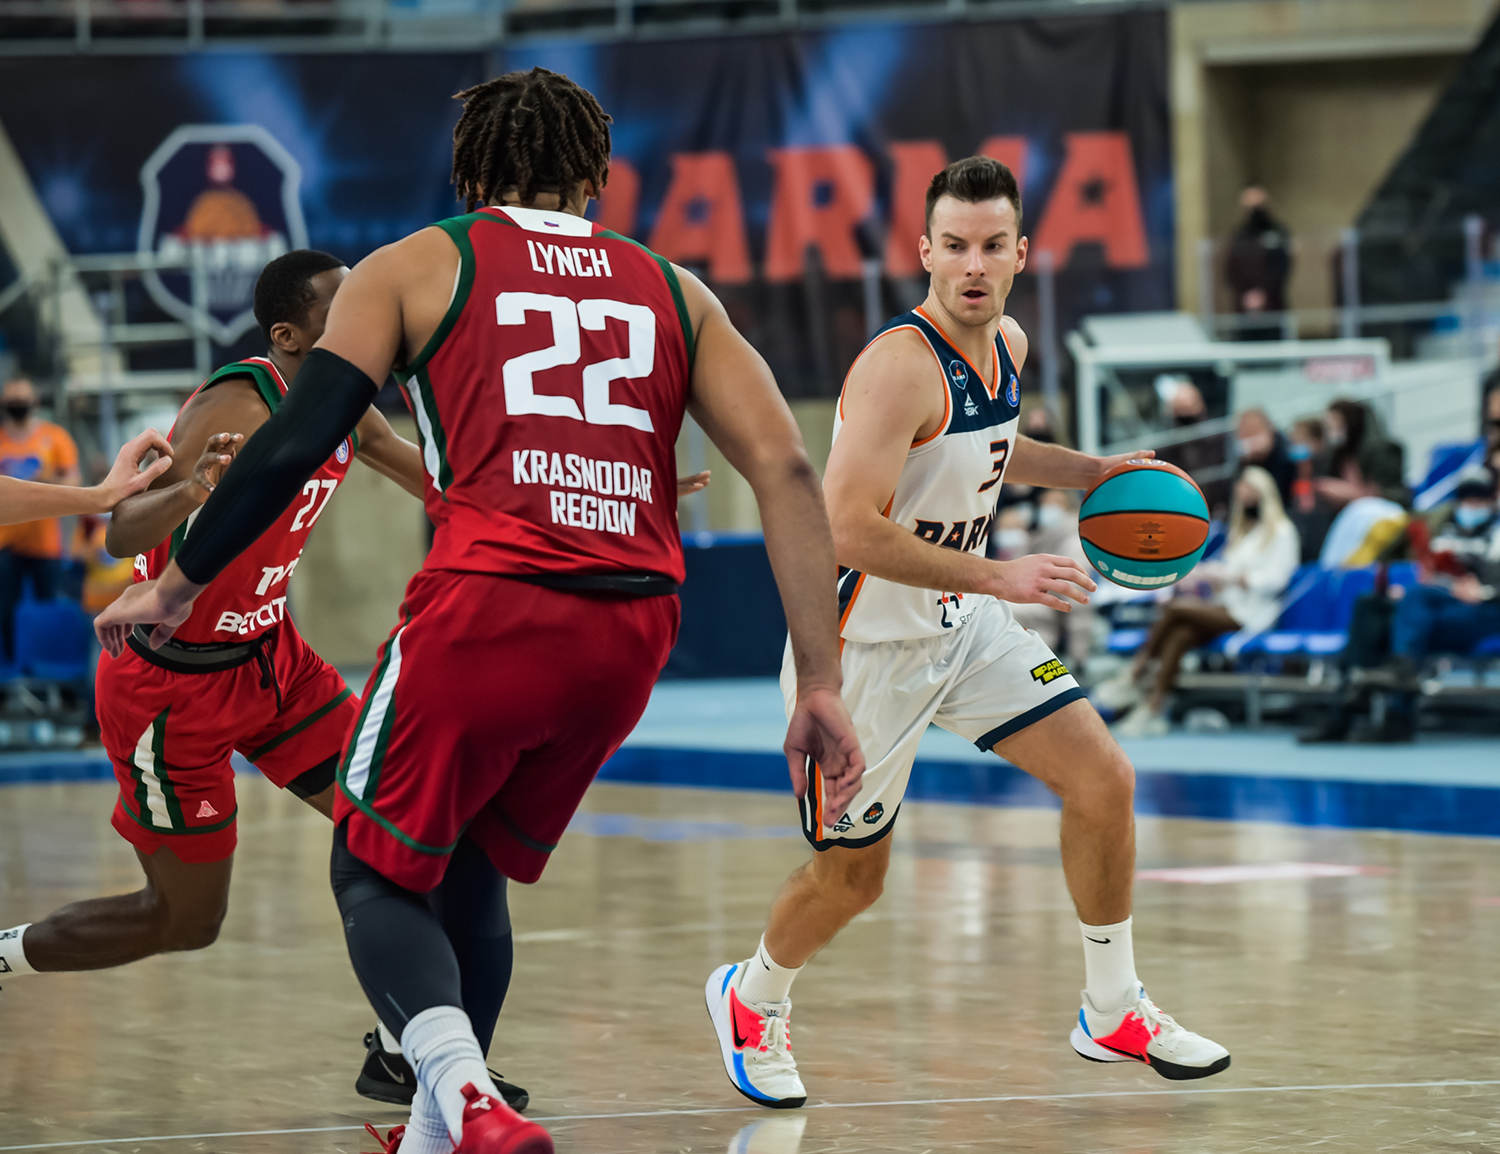 Juskevicius on fire, PARMA beat Loko for the first time